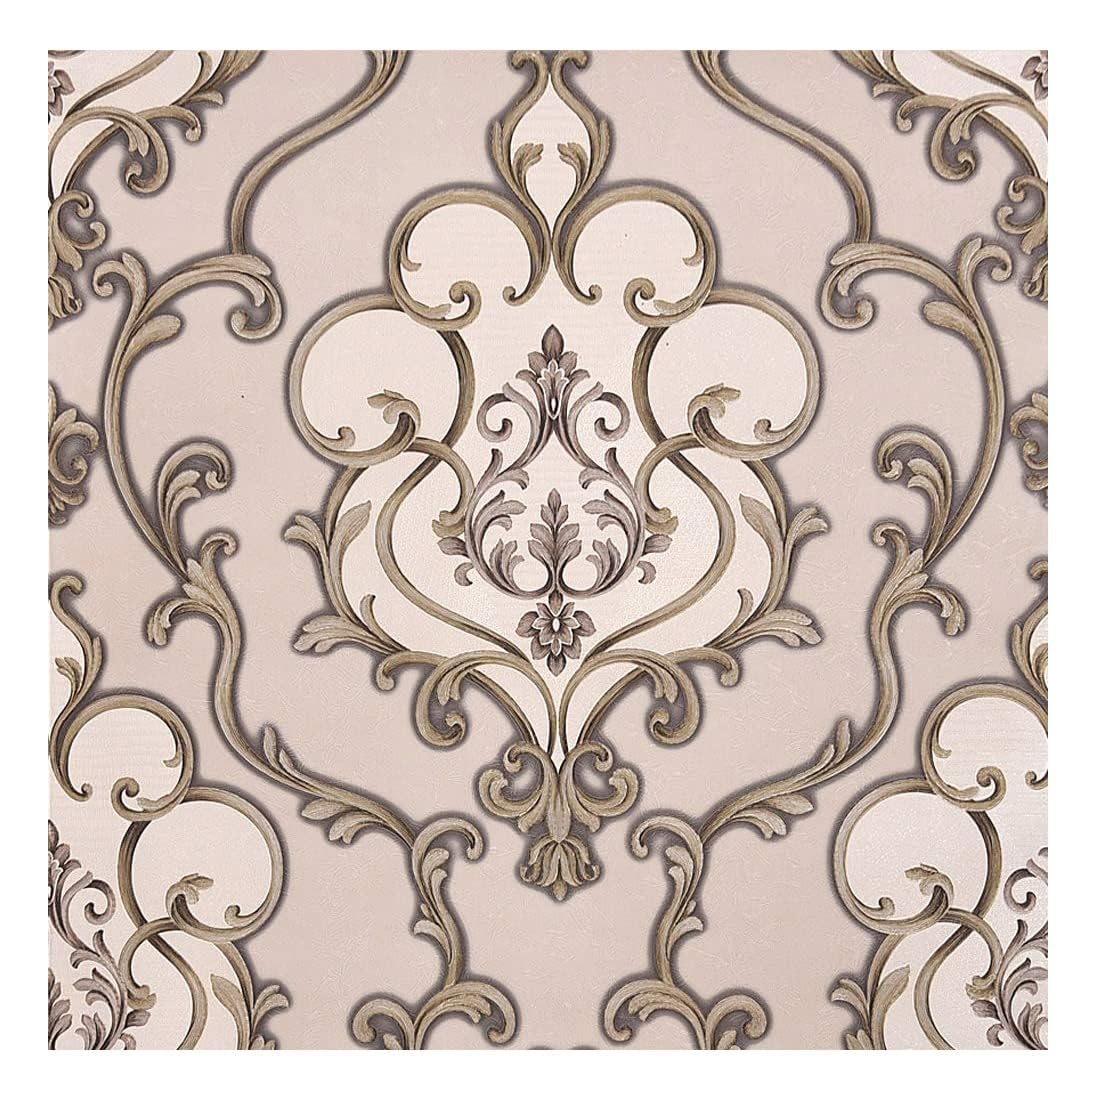 3D Latest Ivory Damask Design Brown Wallpaper Roll for Home Walls 57 Sq Ft (0.53m or 21 Inches x 10m or 33 Feet)